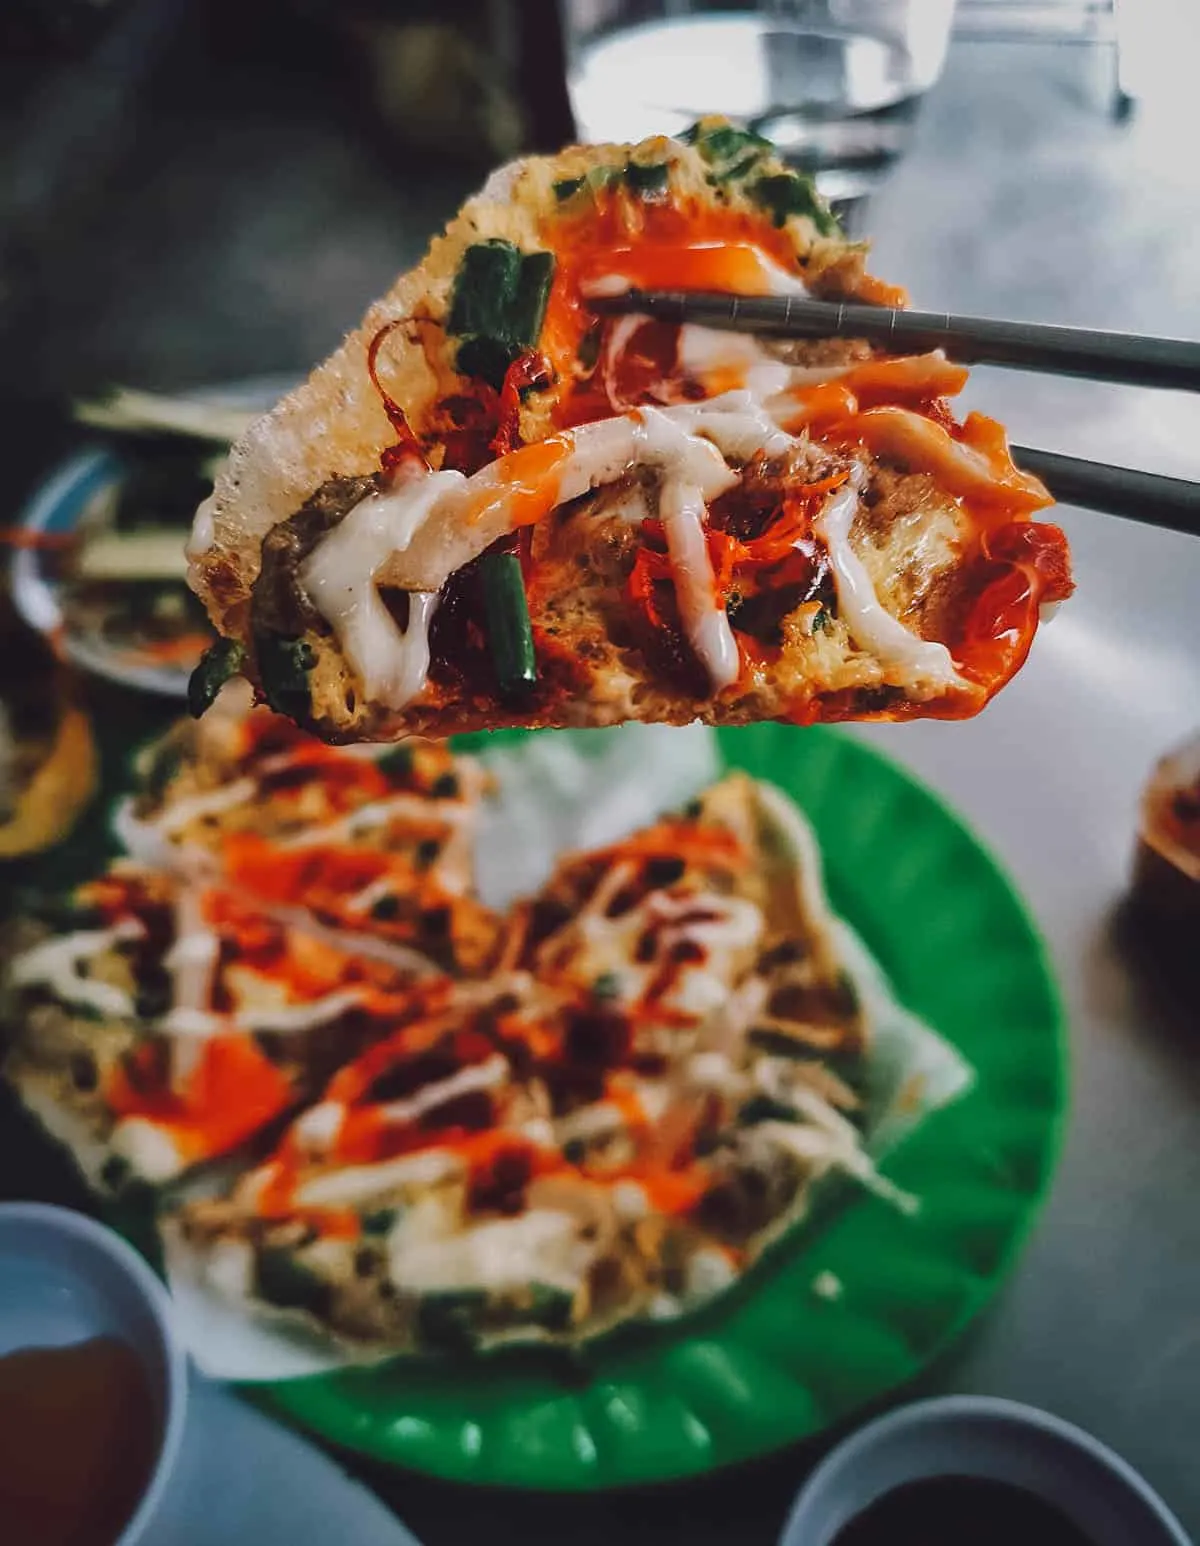 Banh trang trung or grilled rice paper at a restaurant in Hue